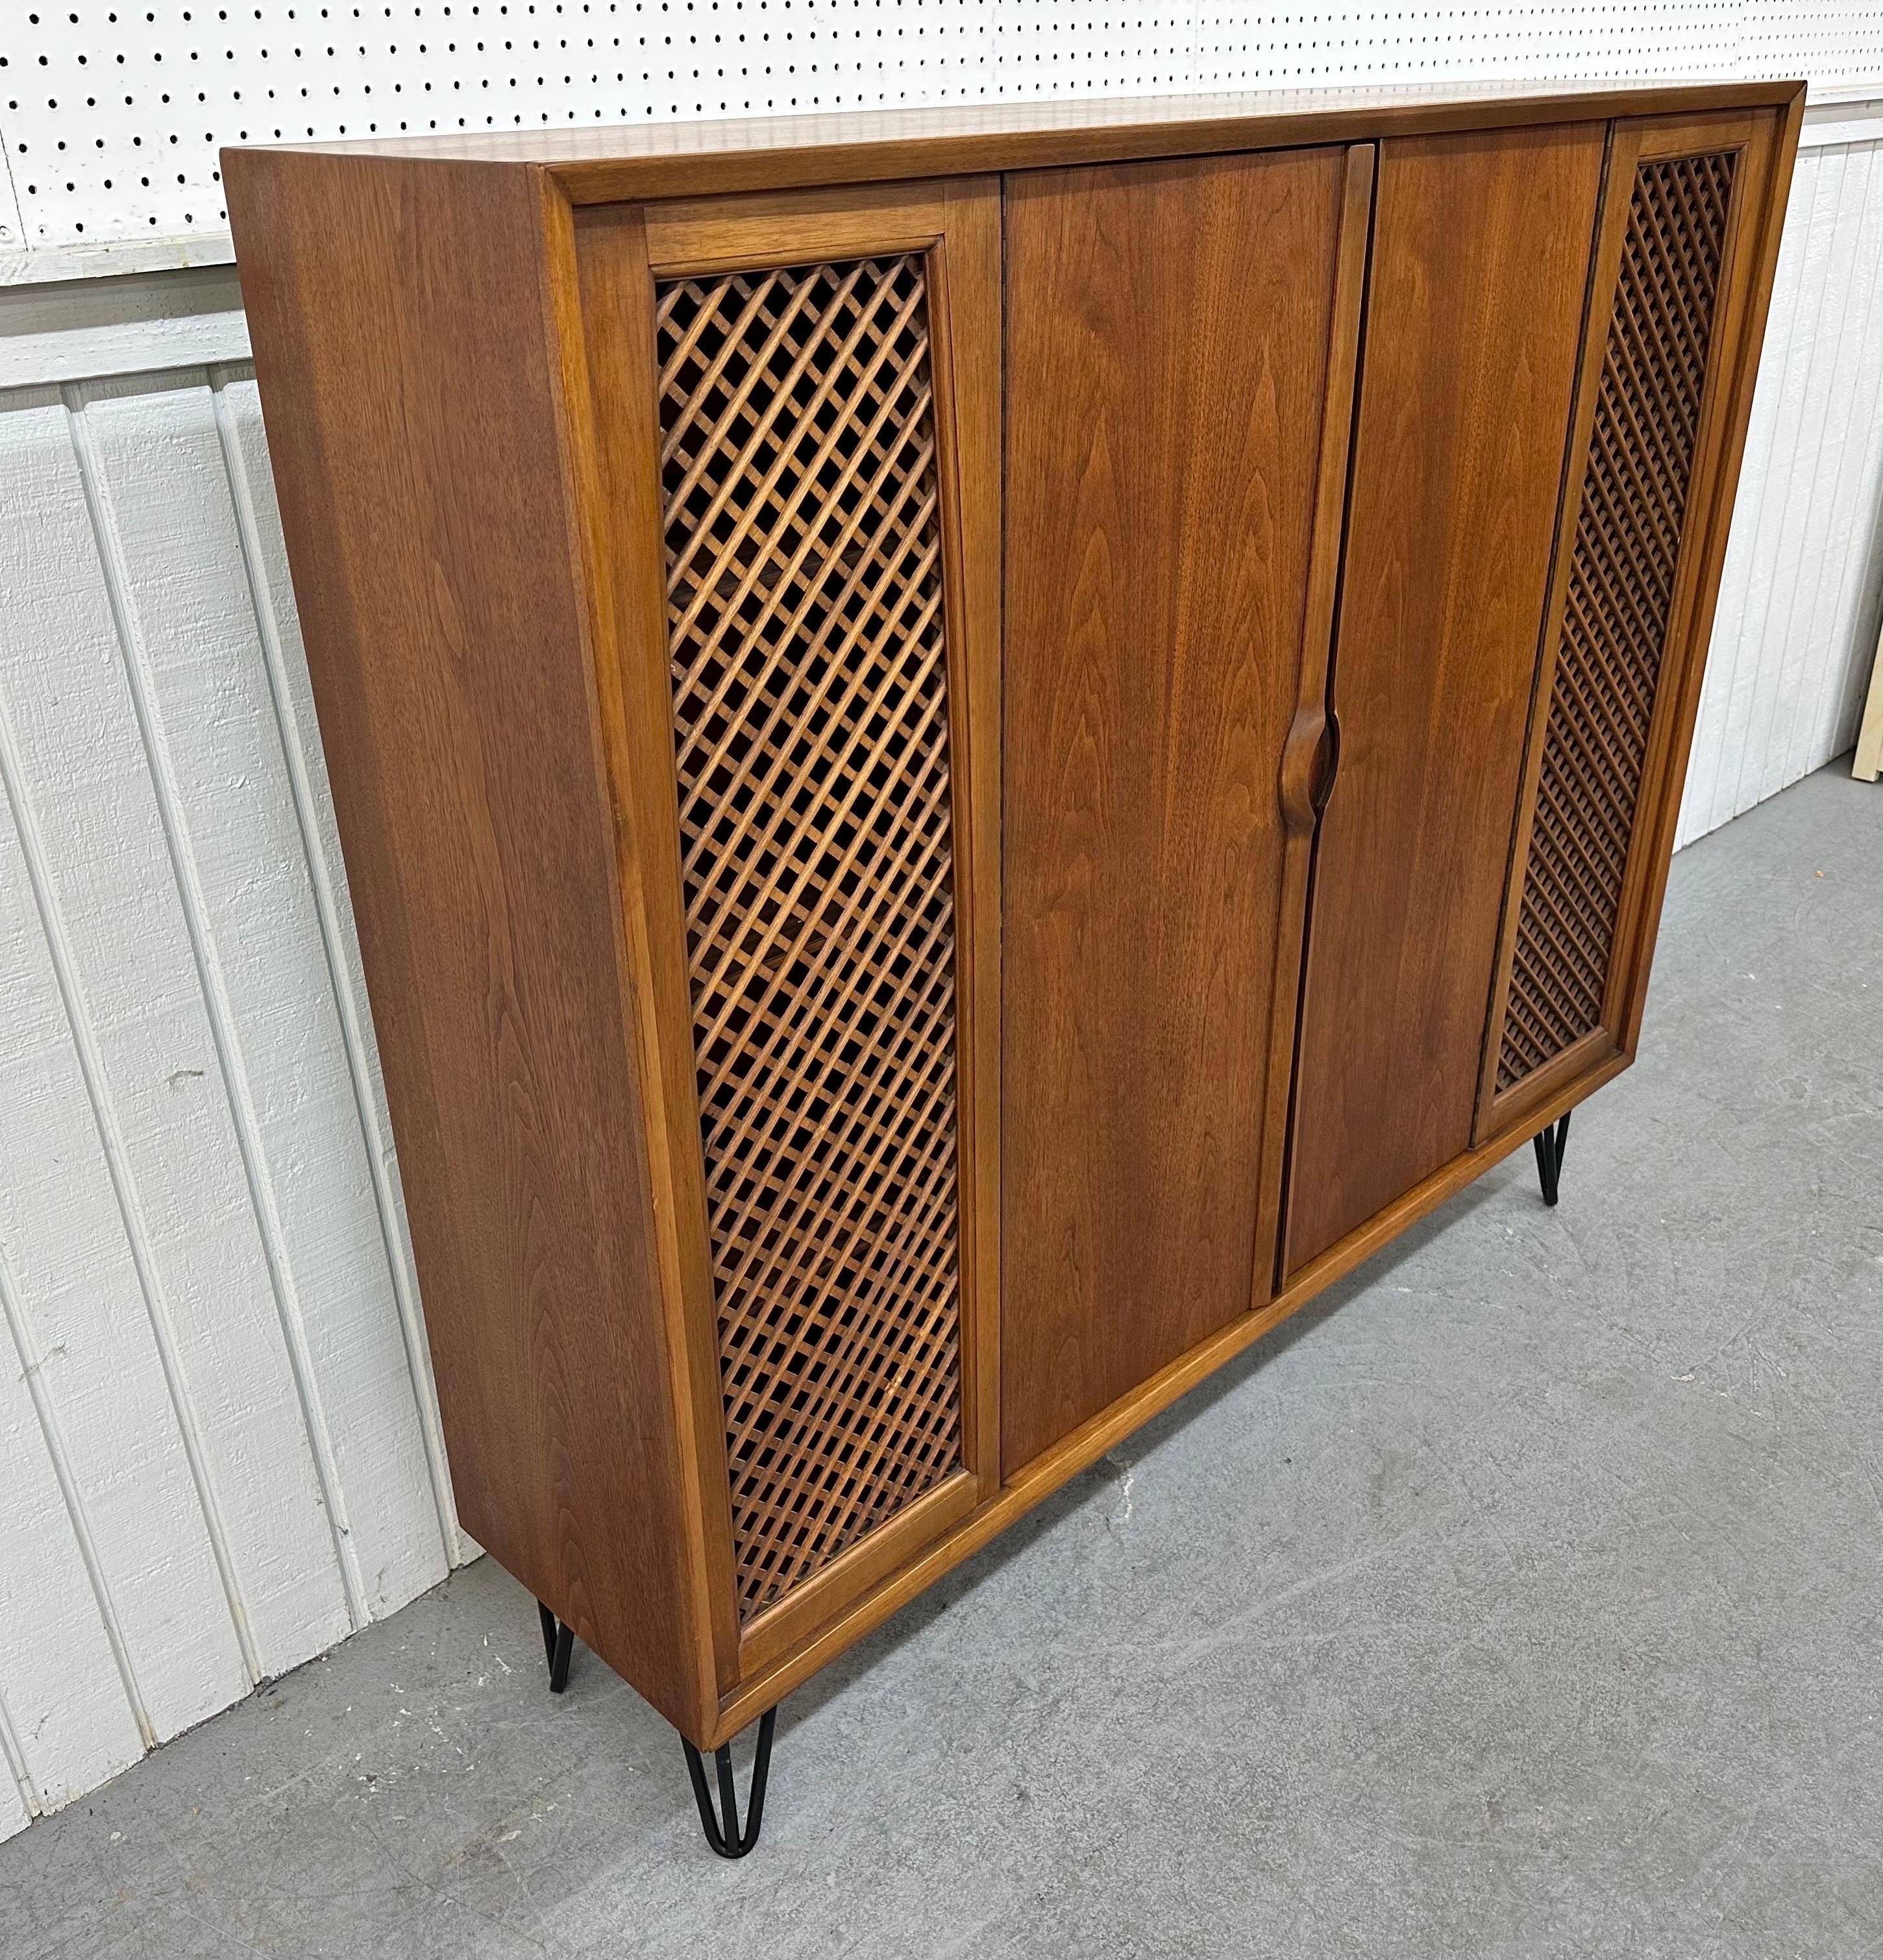 This listing is for a Mid-Century Modern Walnut Hairpin Bookcase. Featuring a straight line design, two doors that open up to storage space, wooden pulls, hairpins legs, and a beautiful walnut finish. This is an exceptional combination of quality